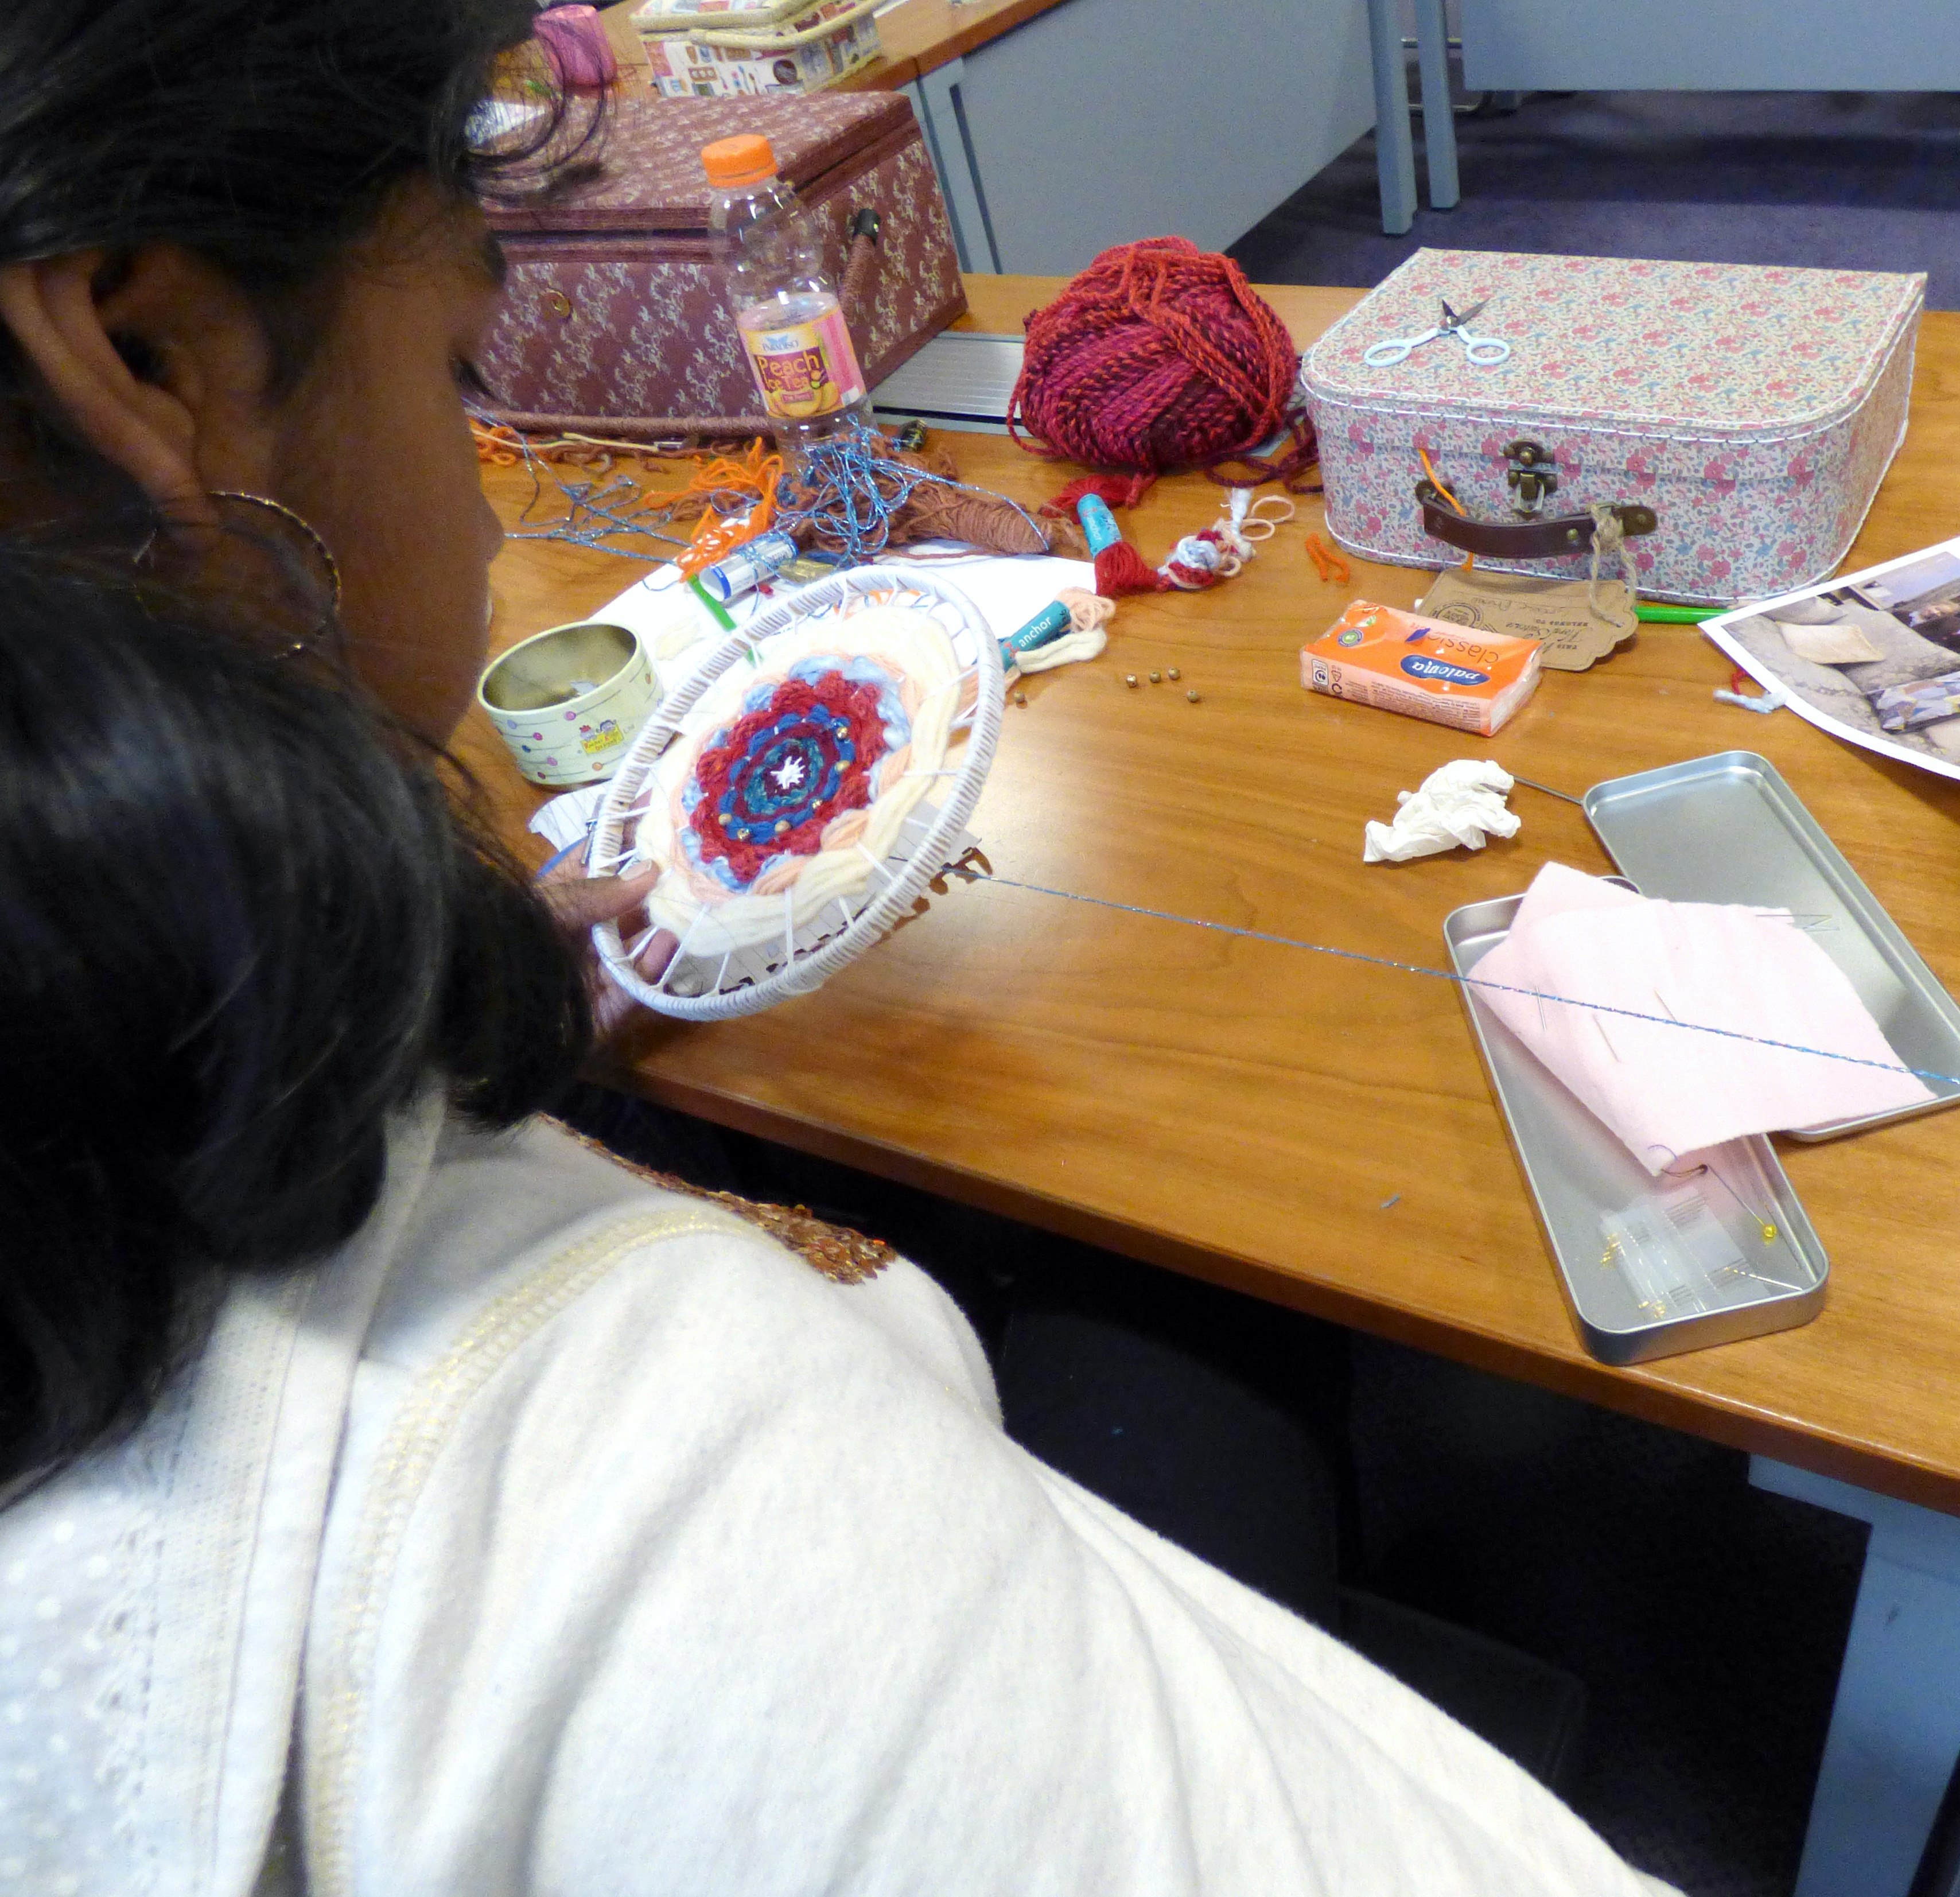 YE group are making a circular weaving with added embroidery